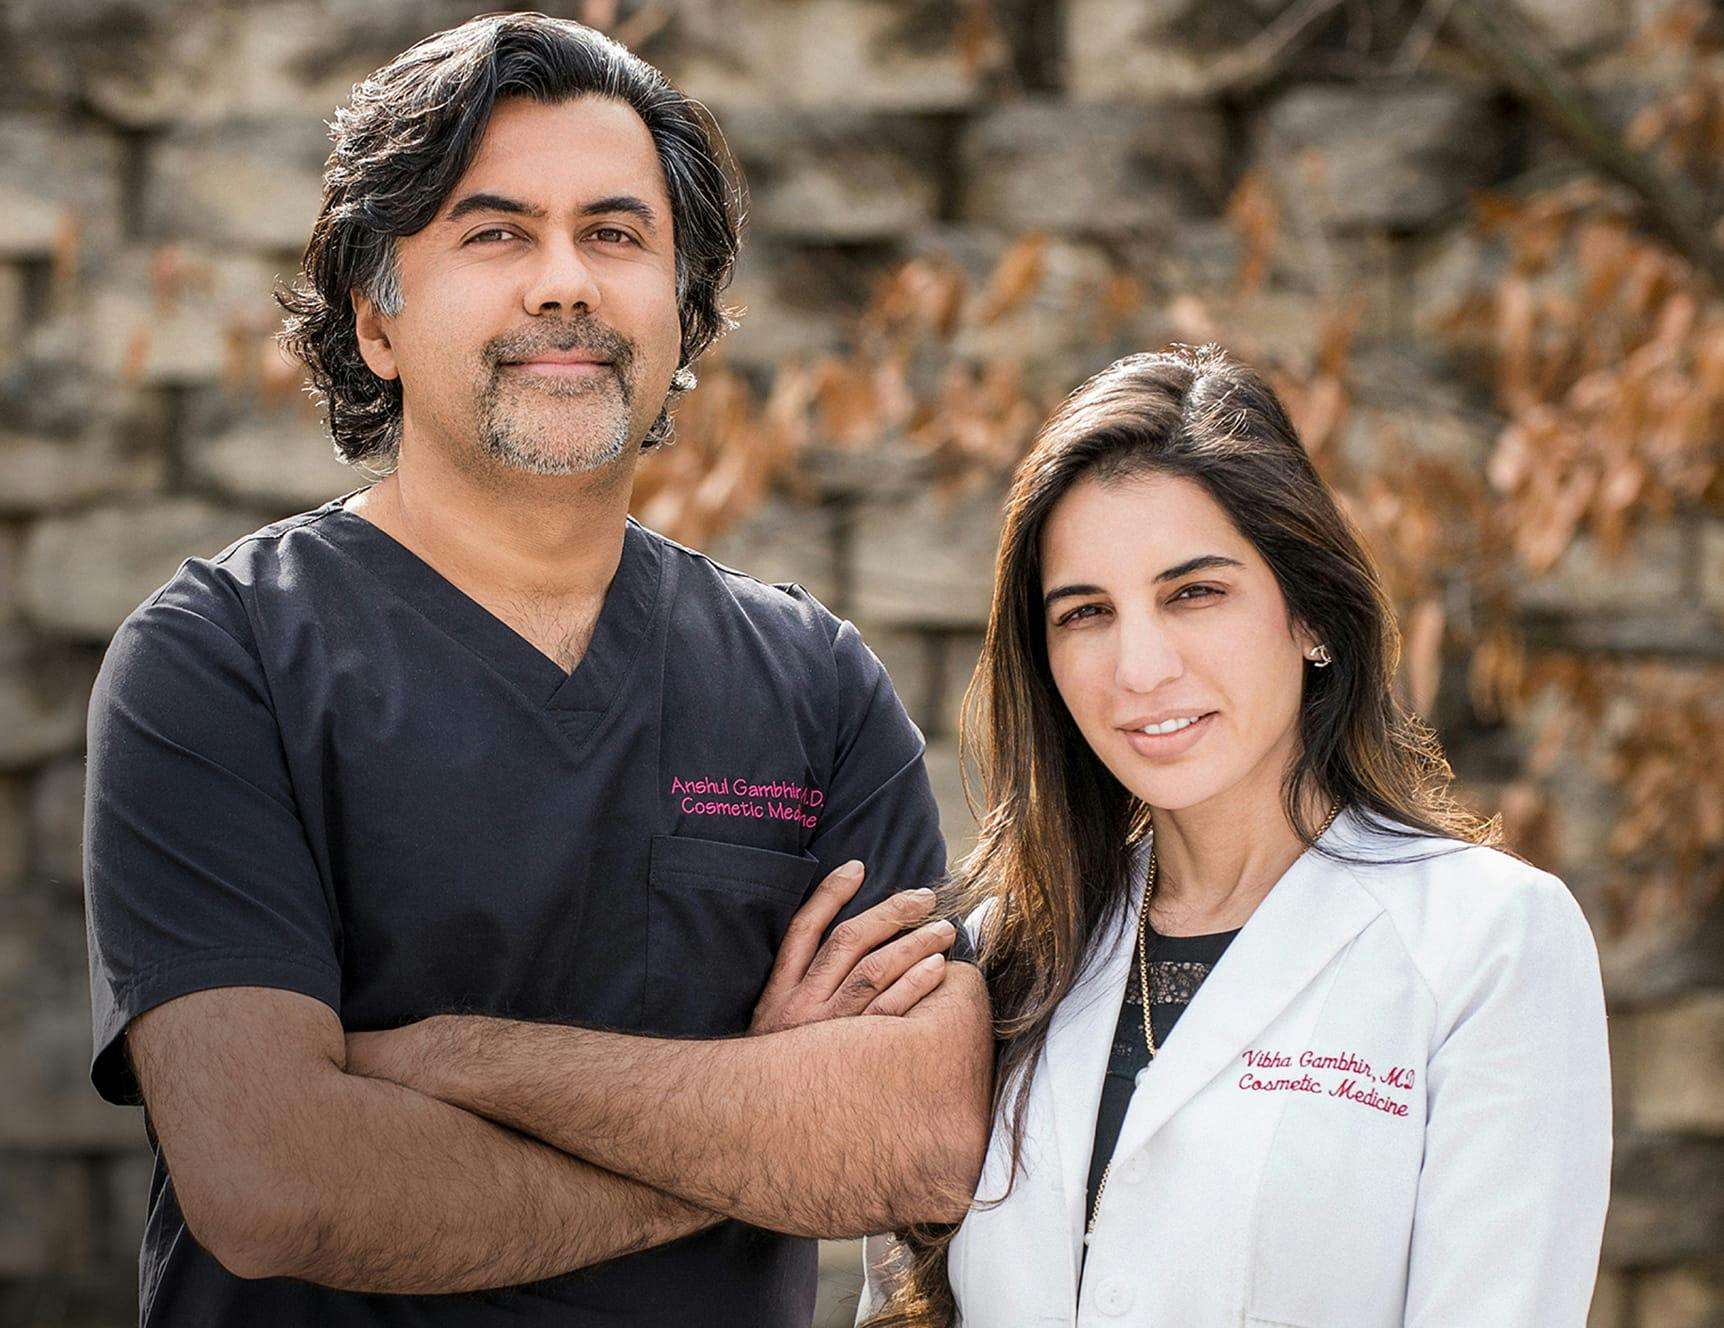 Drs. Anshul and Vibha Gambhir smiling with arms crossed